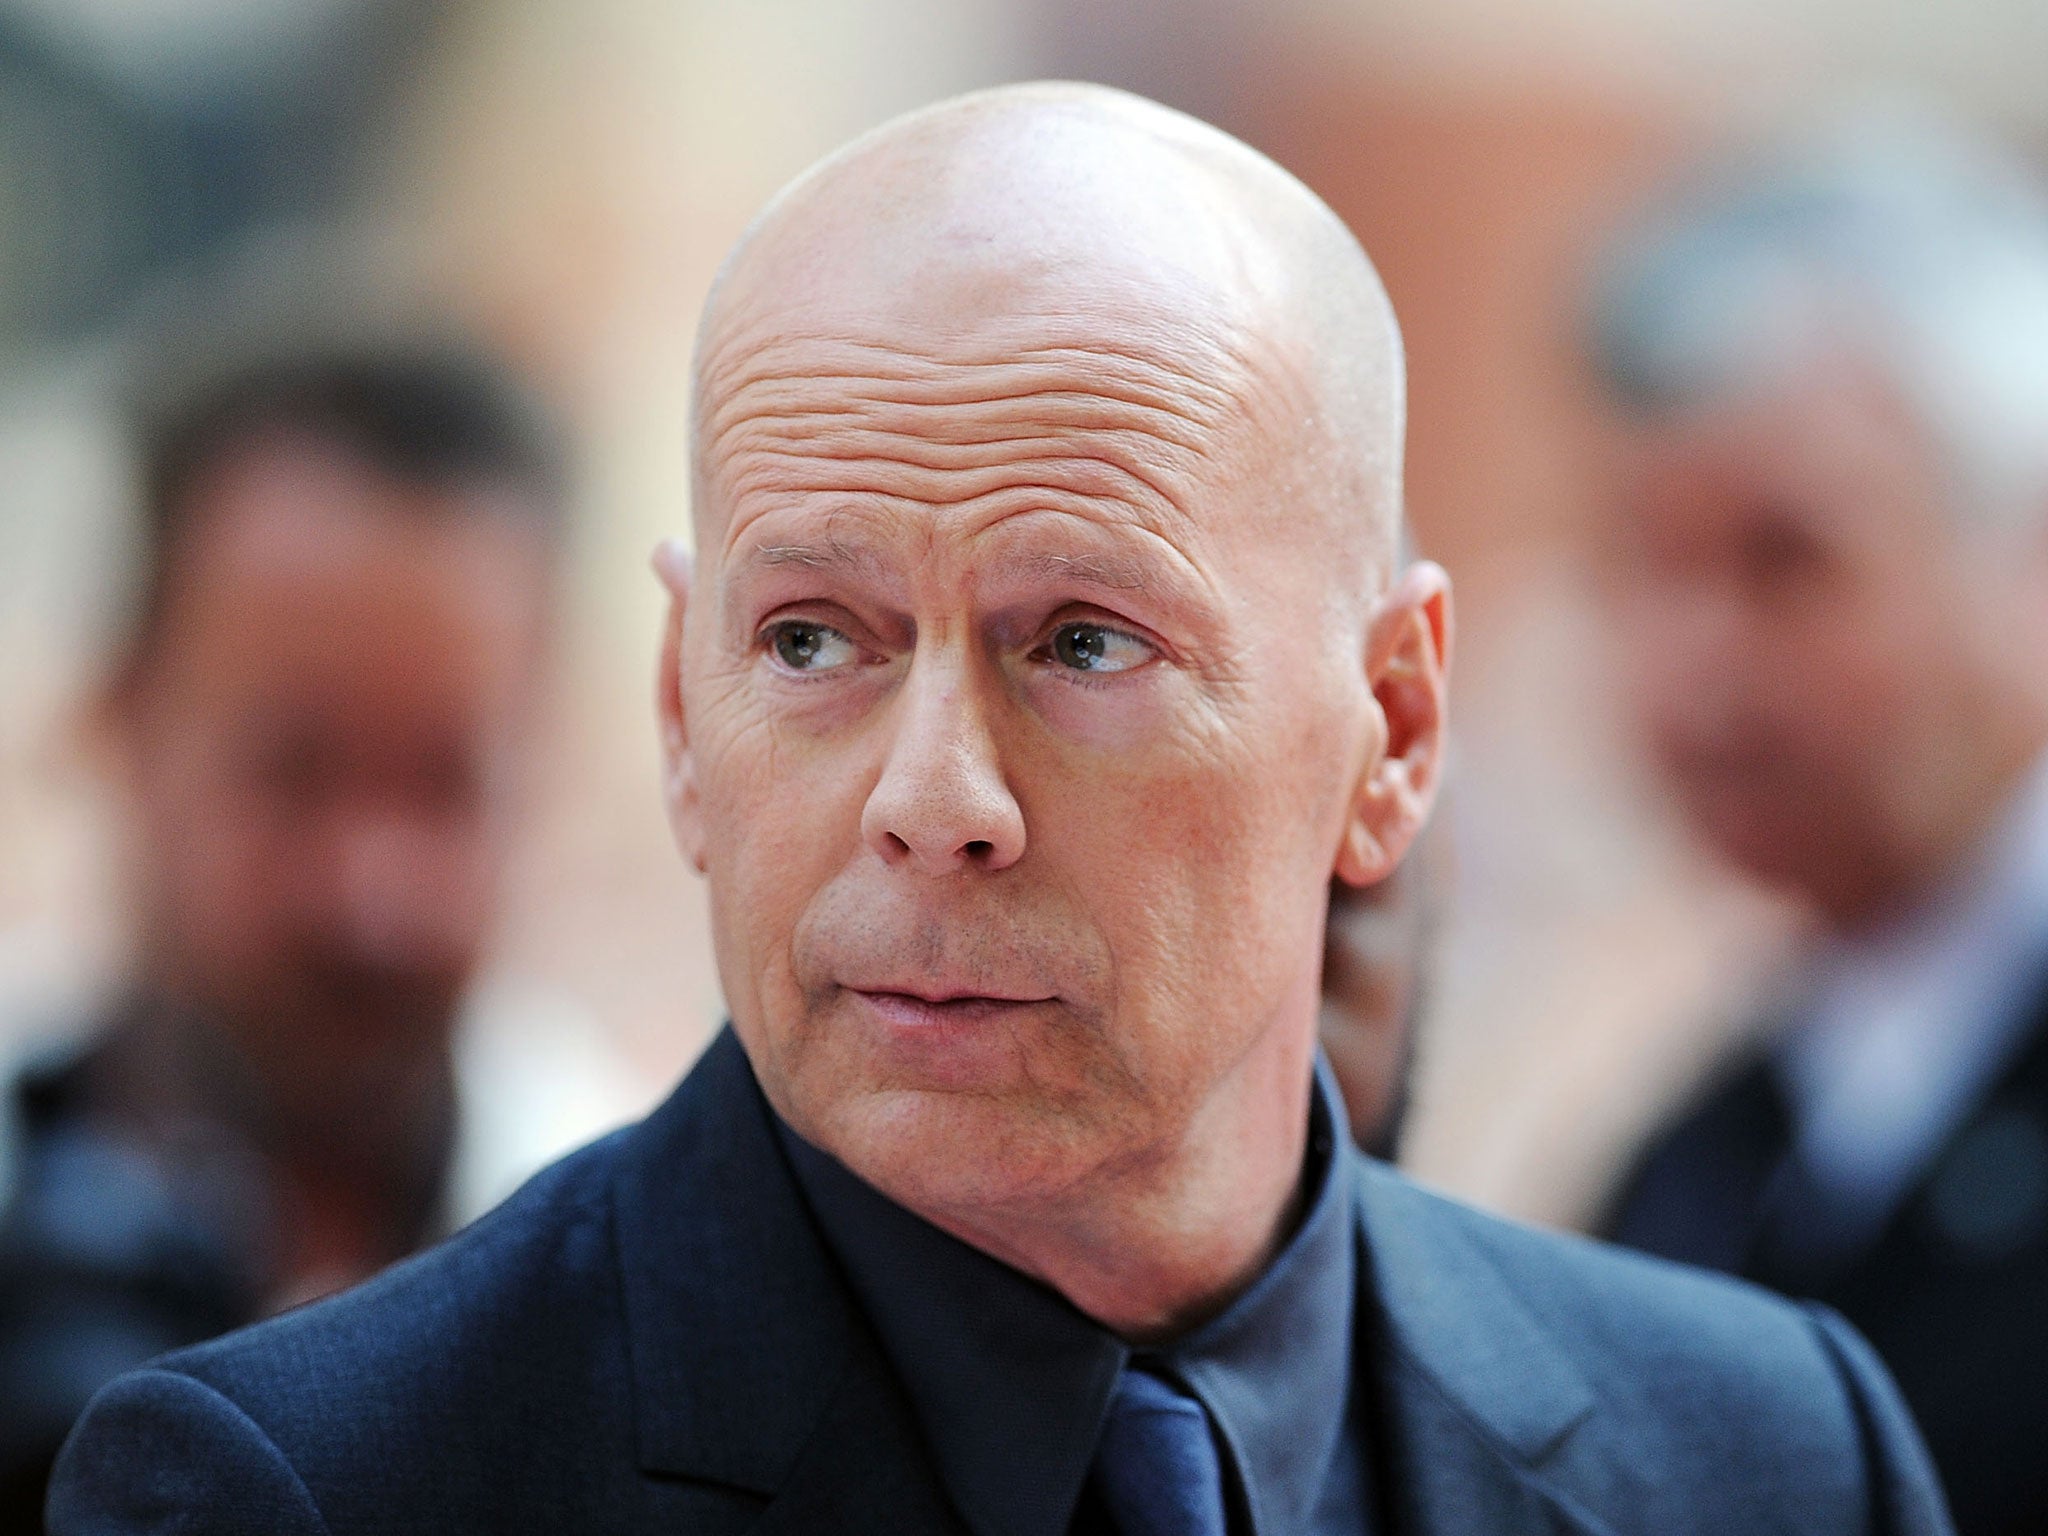 Bruce Willis is best known for the Die Hard movie franchise